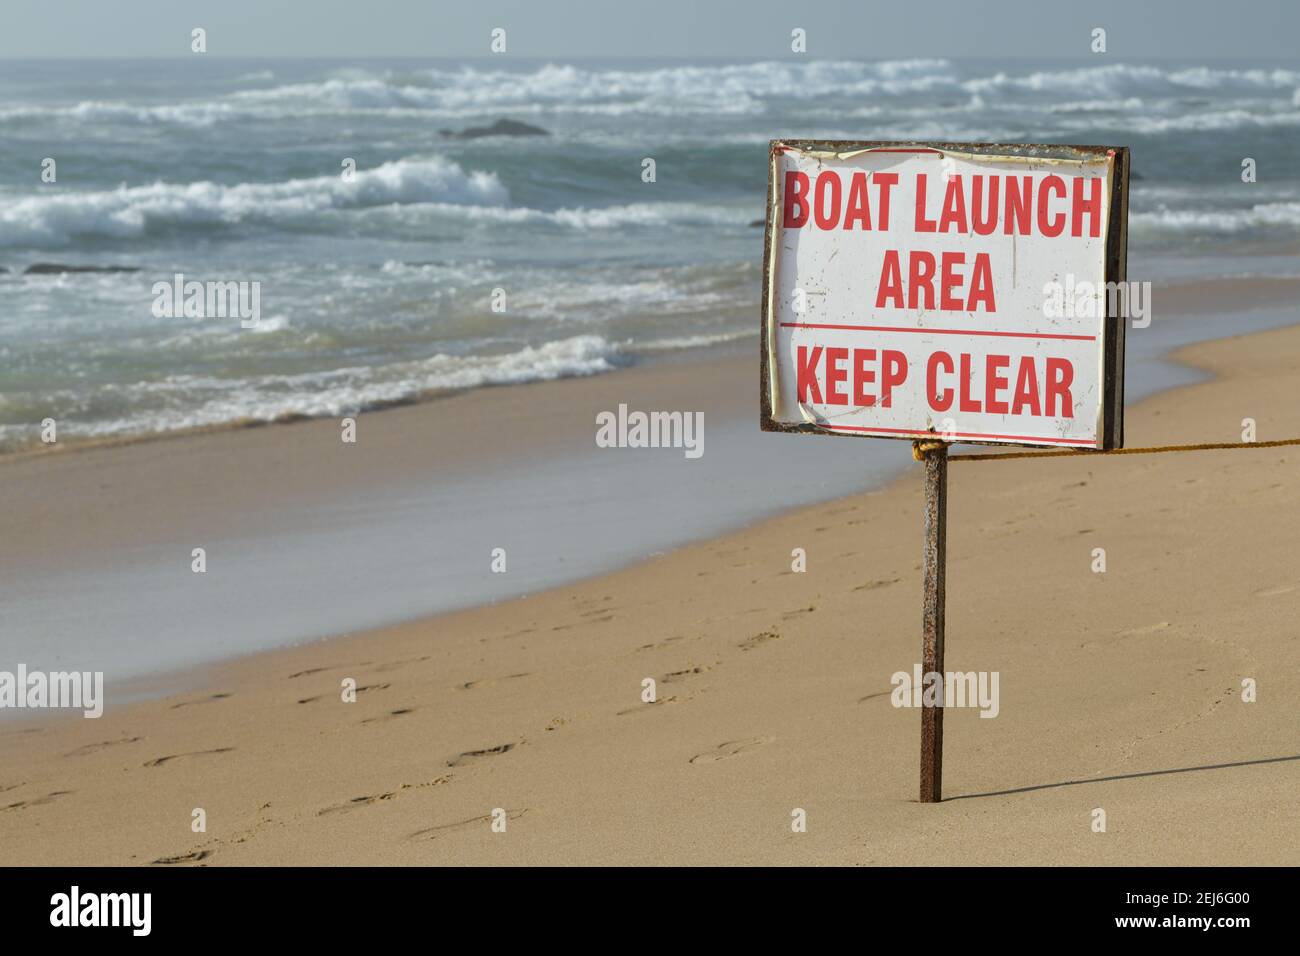 Sign, signage on beach, keep clear, boating activity, communication to people using seashore, Durban, South Africa, coastal landscape, seascape, ocean Stock Photo